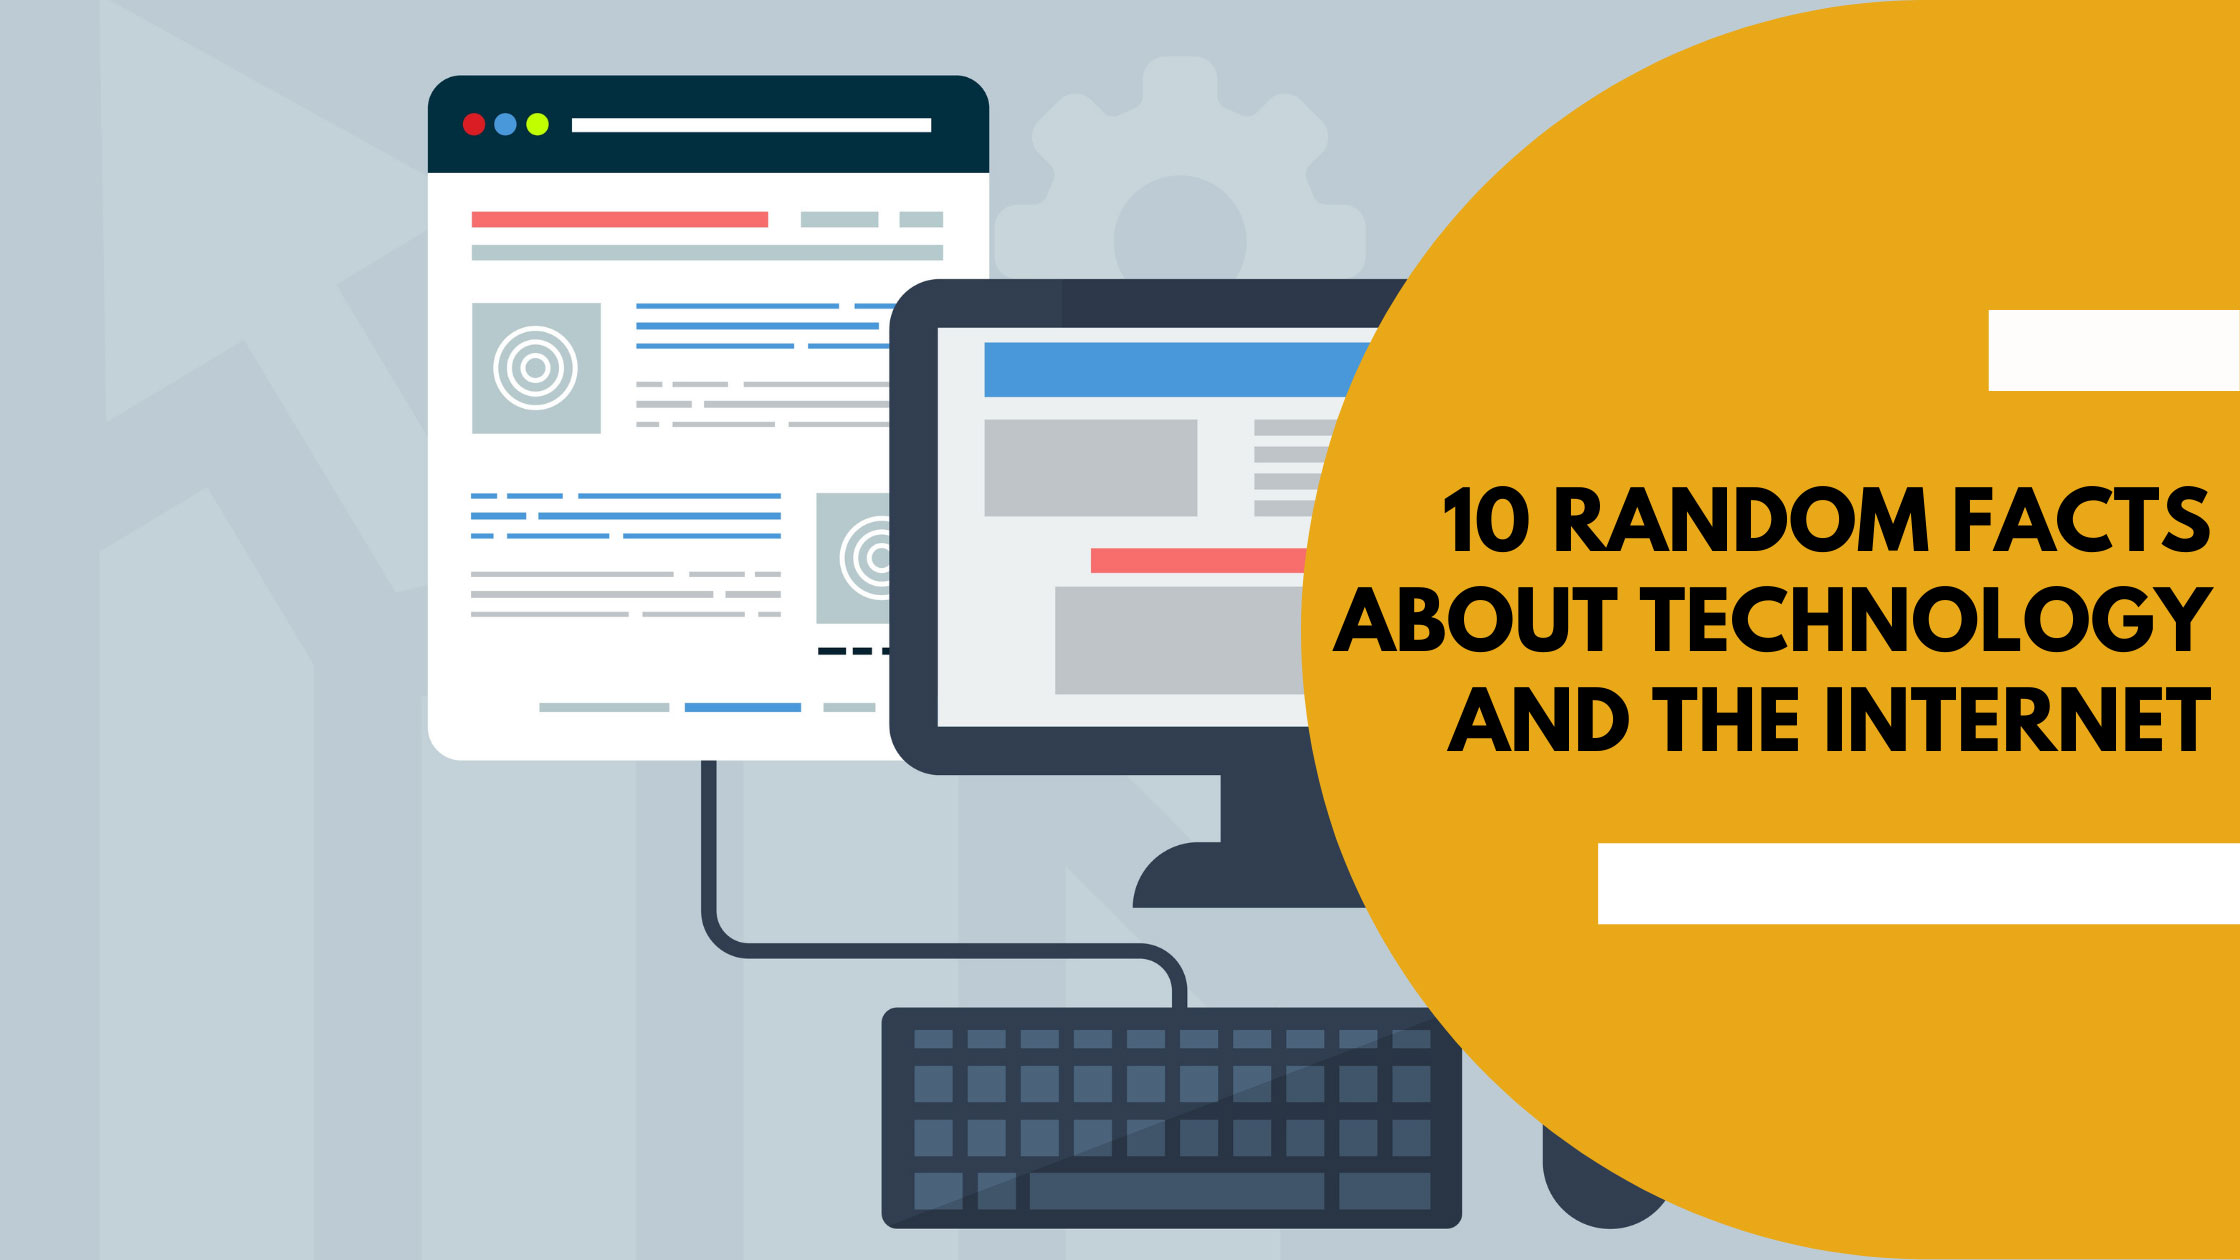 10 random facts about technology and the internet